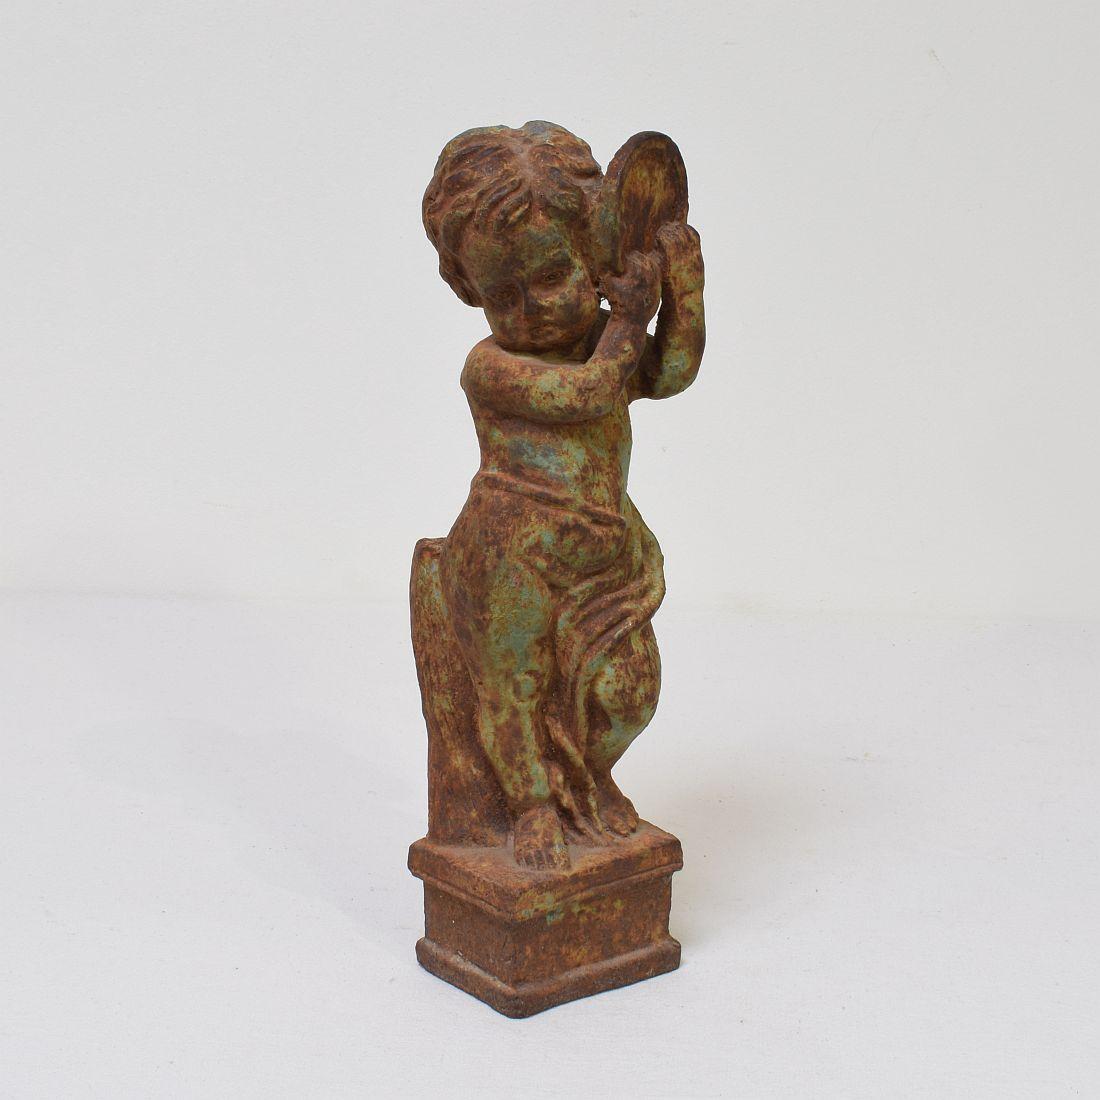 Very nice and small garden statue representing an angel holding an a tambourine.
France circa 1850-1900.
Weathered.